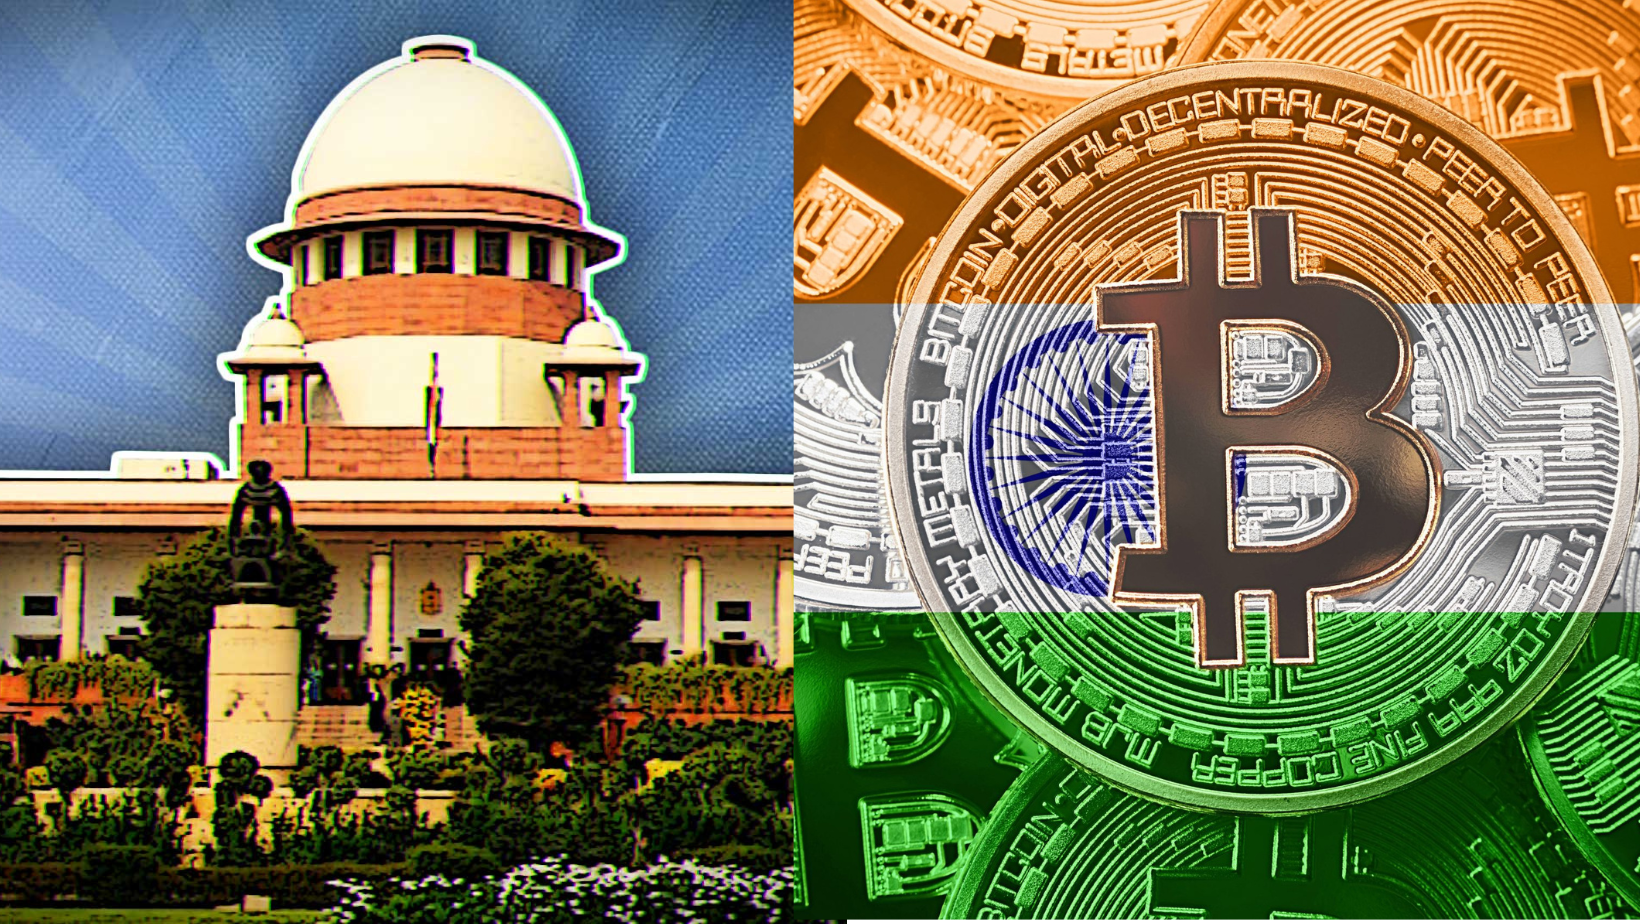 Cryptocurrency Regulation in India